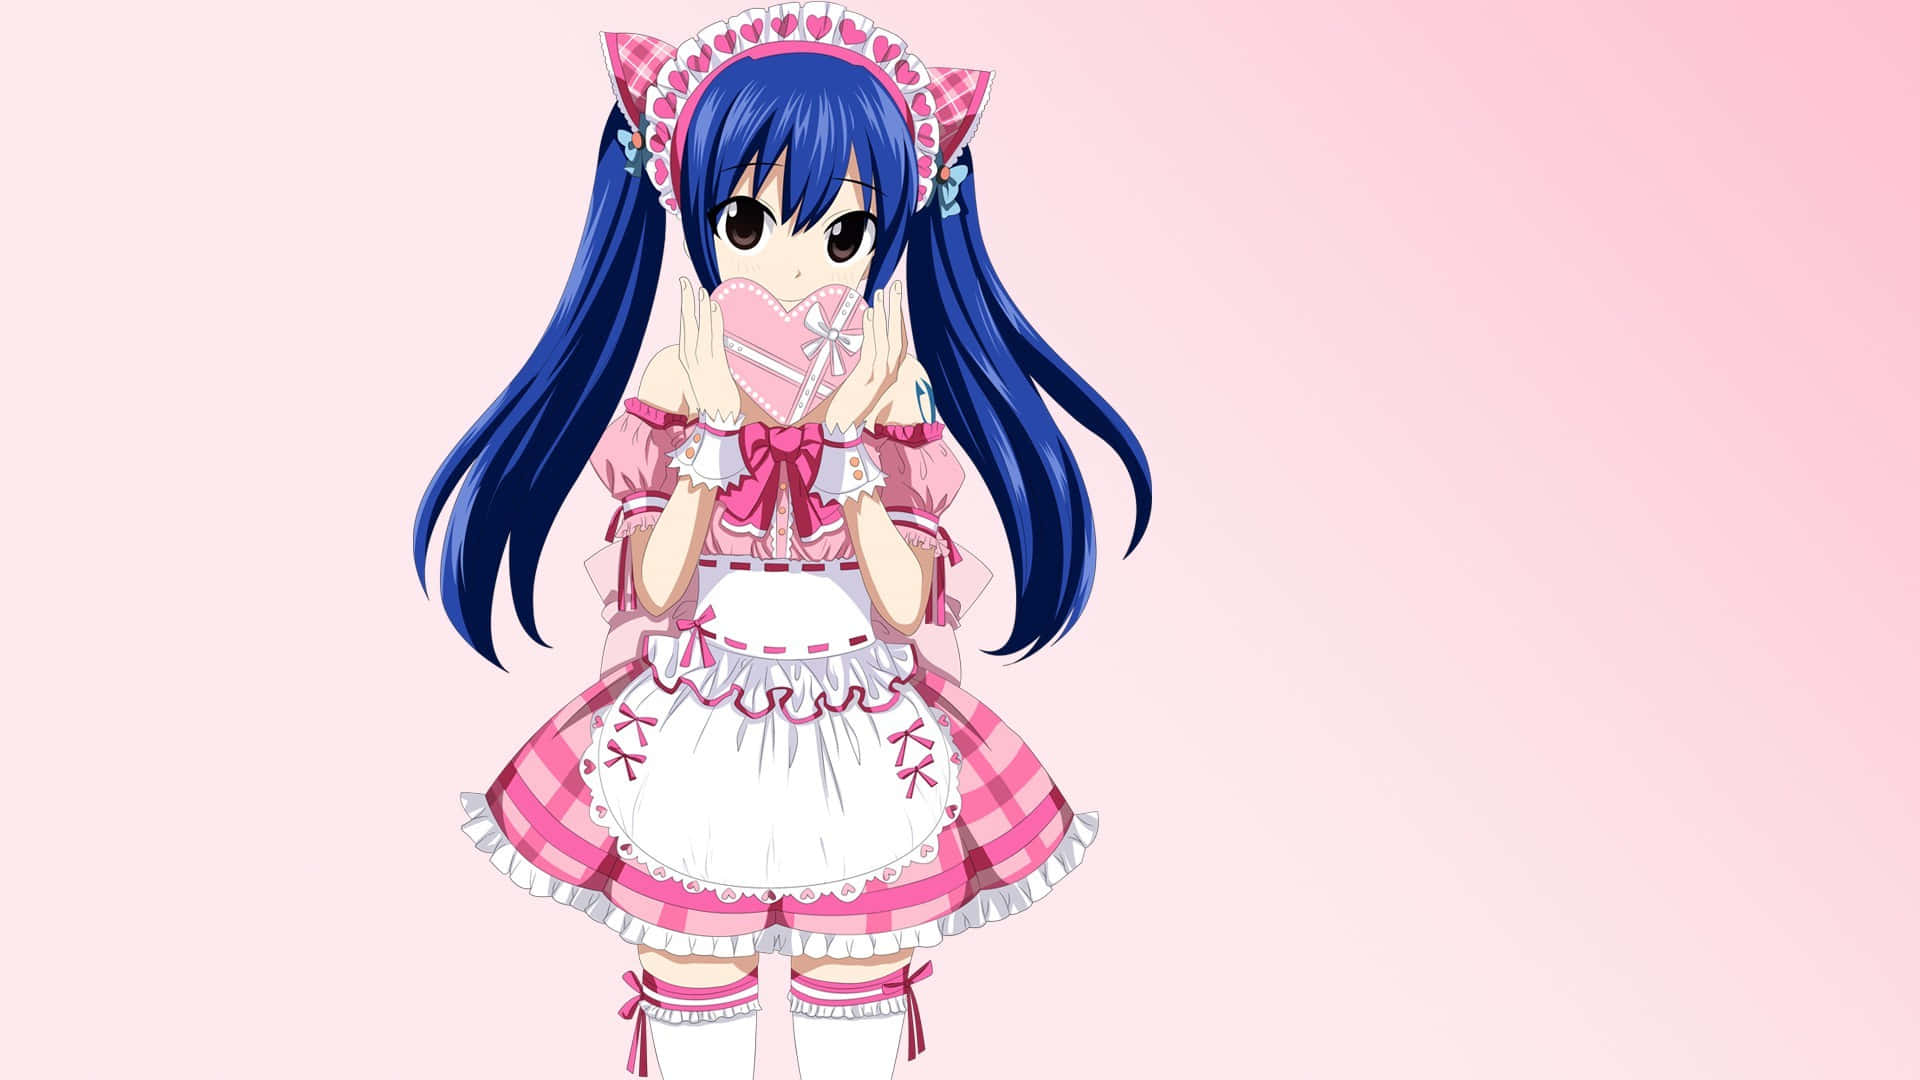 A Girl In A Pink Dress With Blue Hair